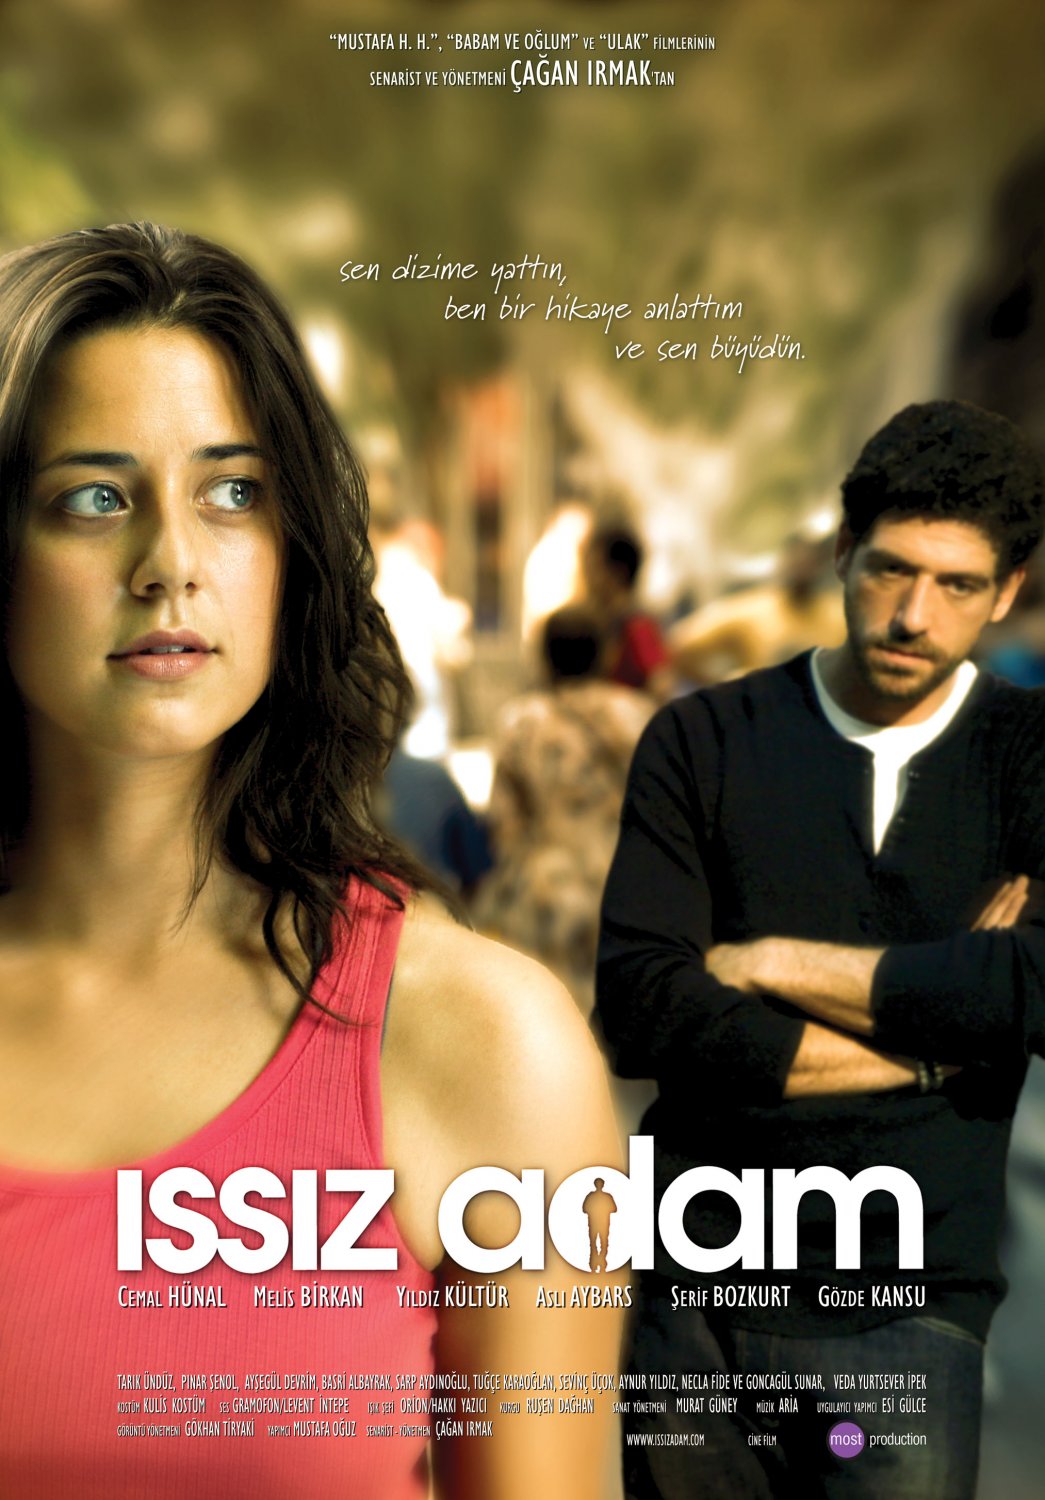 Extra Large Movie Poster Image for Issiz adam 